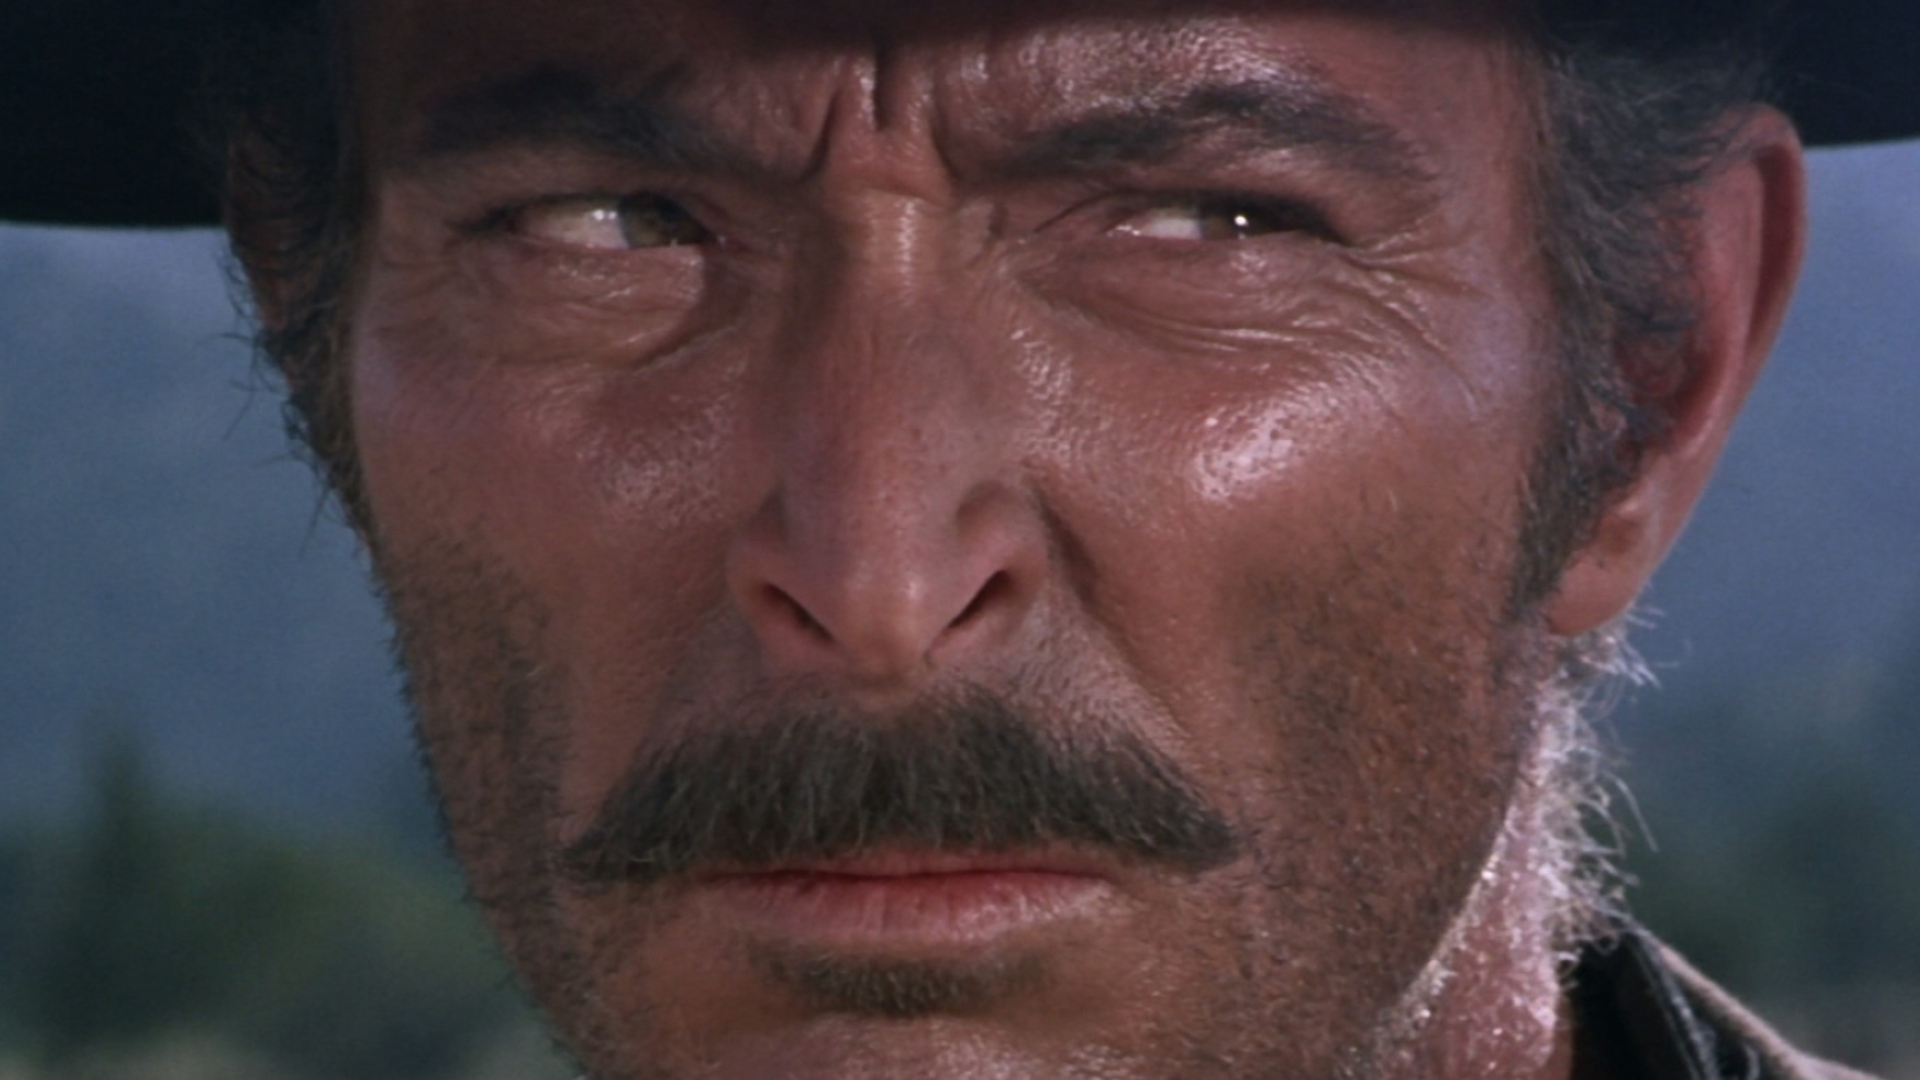 The Good, The Bad And The Ugly, Clint Eastwood, Classic Western, Sergio Leone, 1920x1080 Full HD Desktop